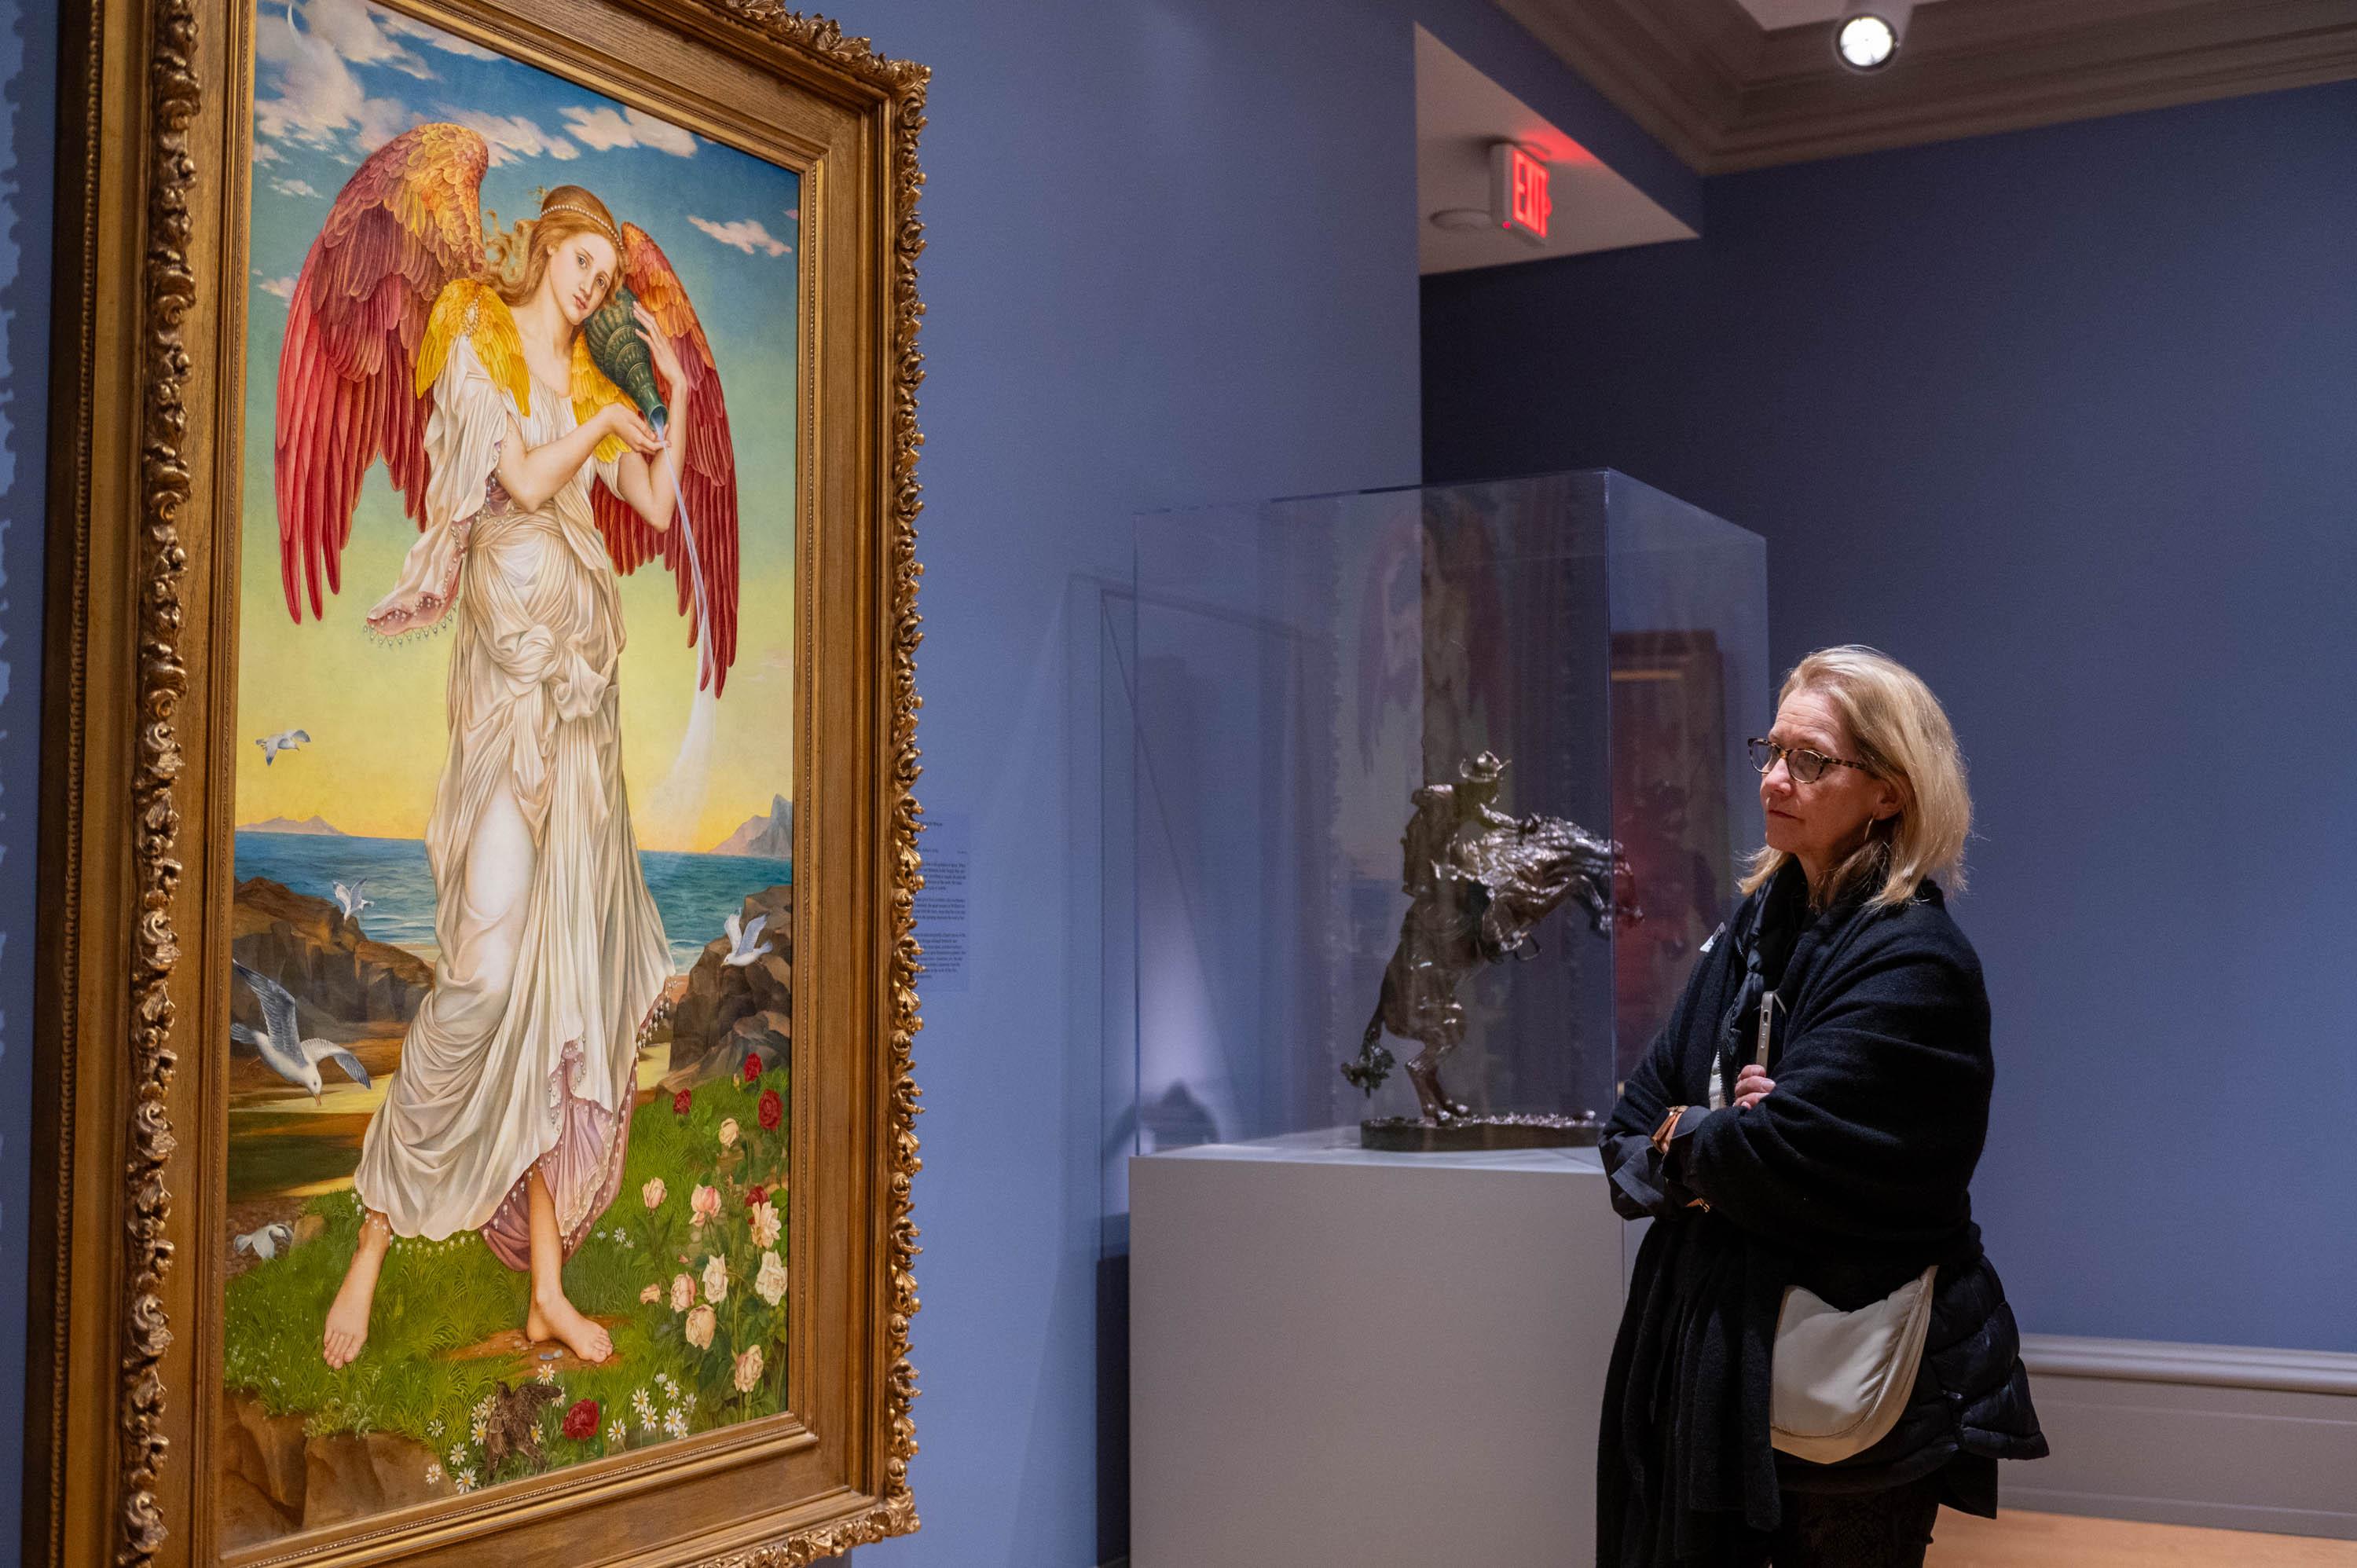 White Woman looking at painting resembling a white angel in white cloth with red wings in a valley type setting